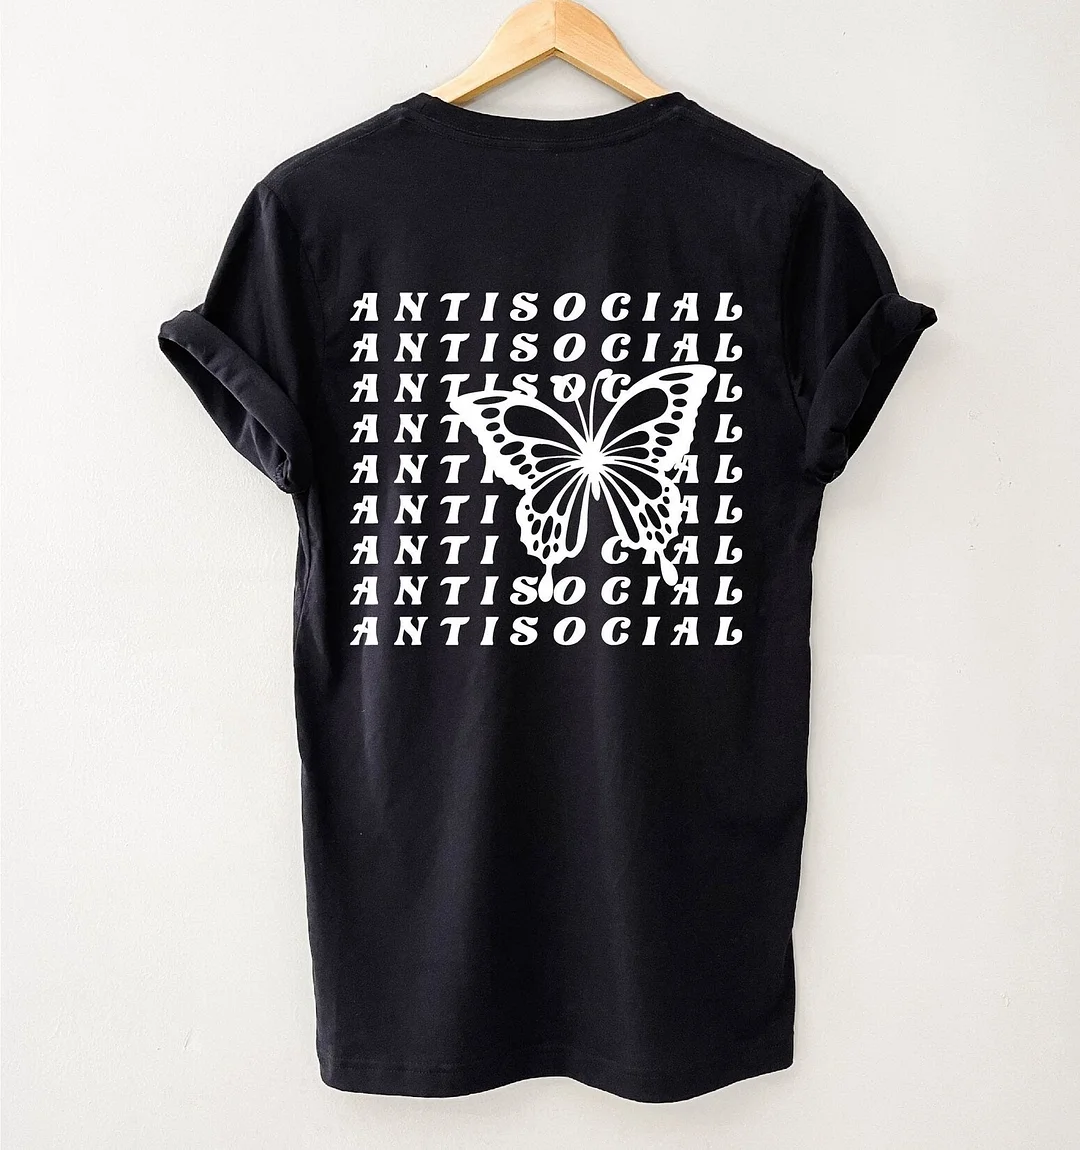 Women And Man Two Sided Antisocial Shirt Butterfly Tshirt Y2K Fashion Aesthetic Tee Top